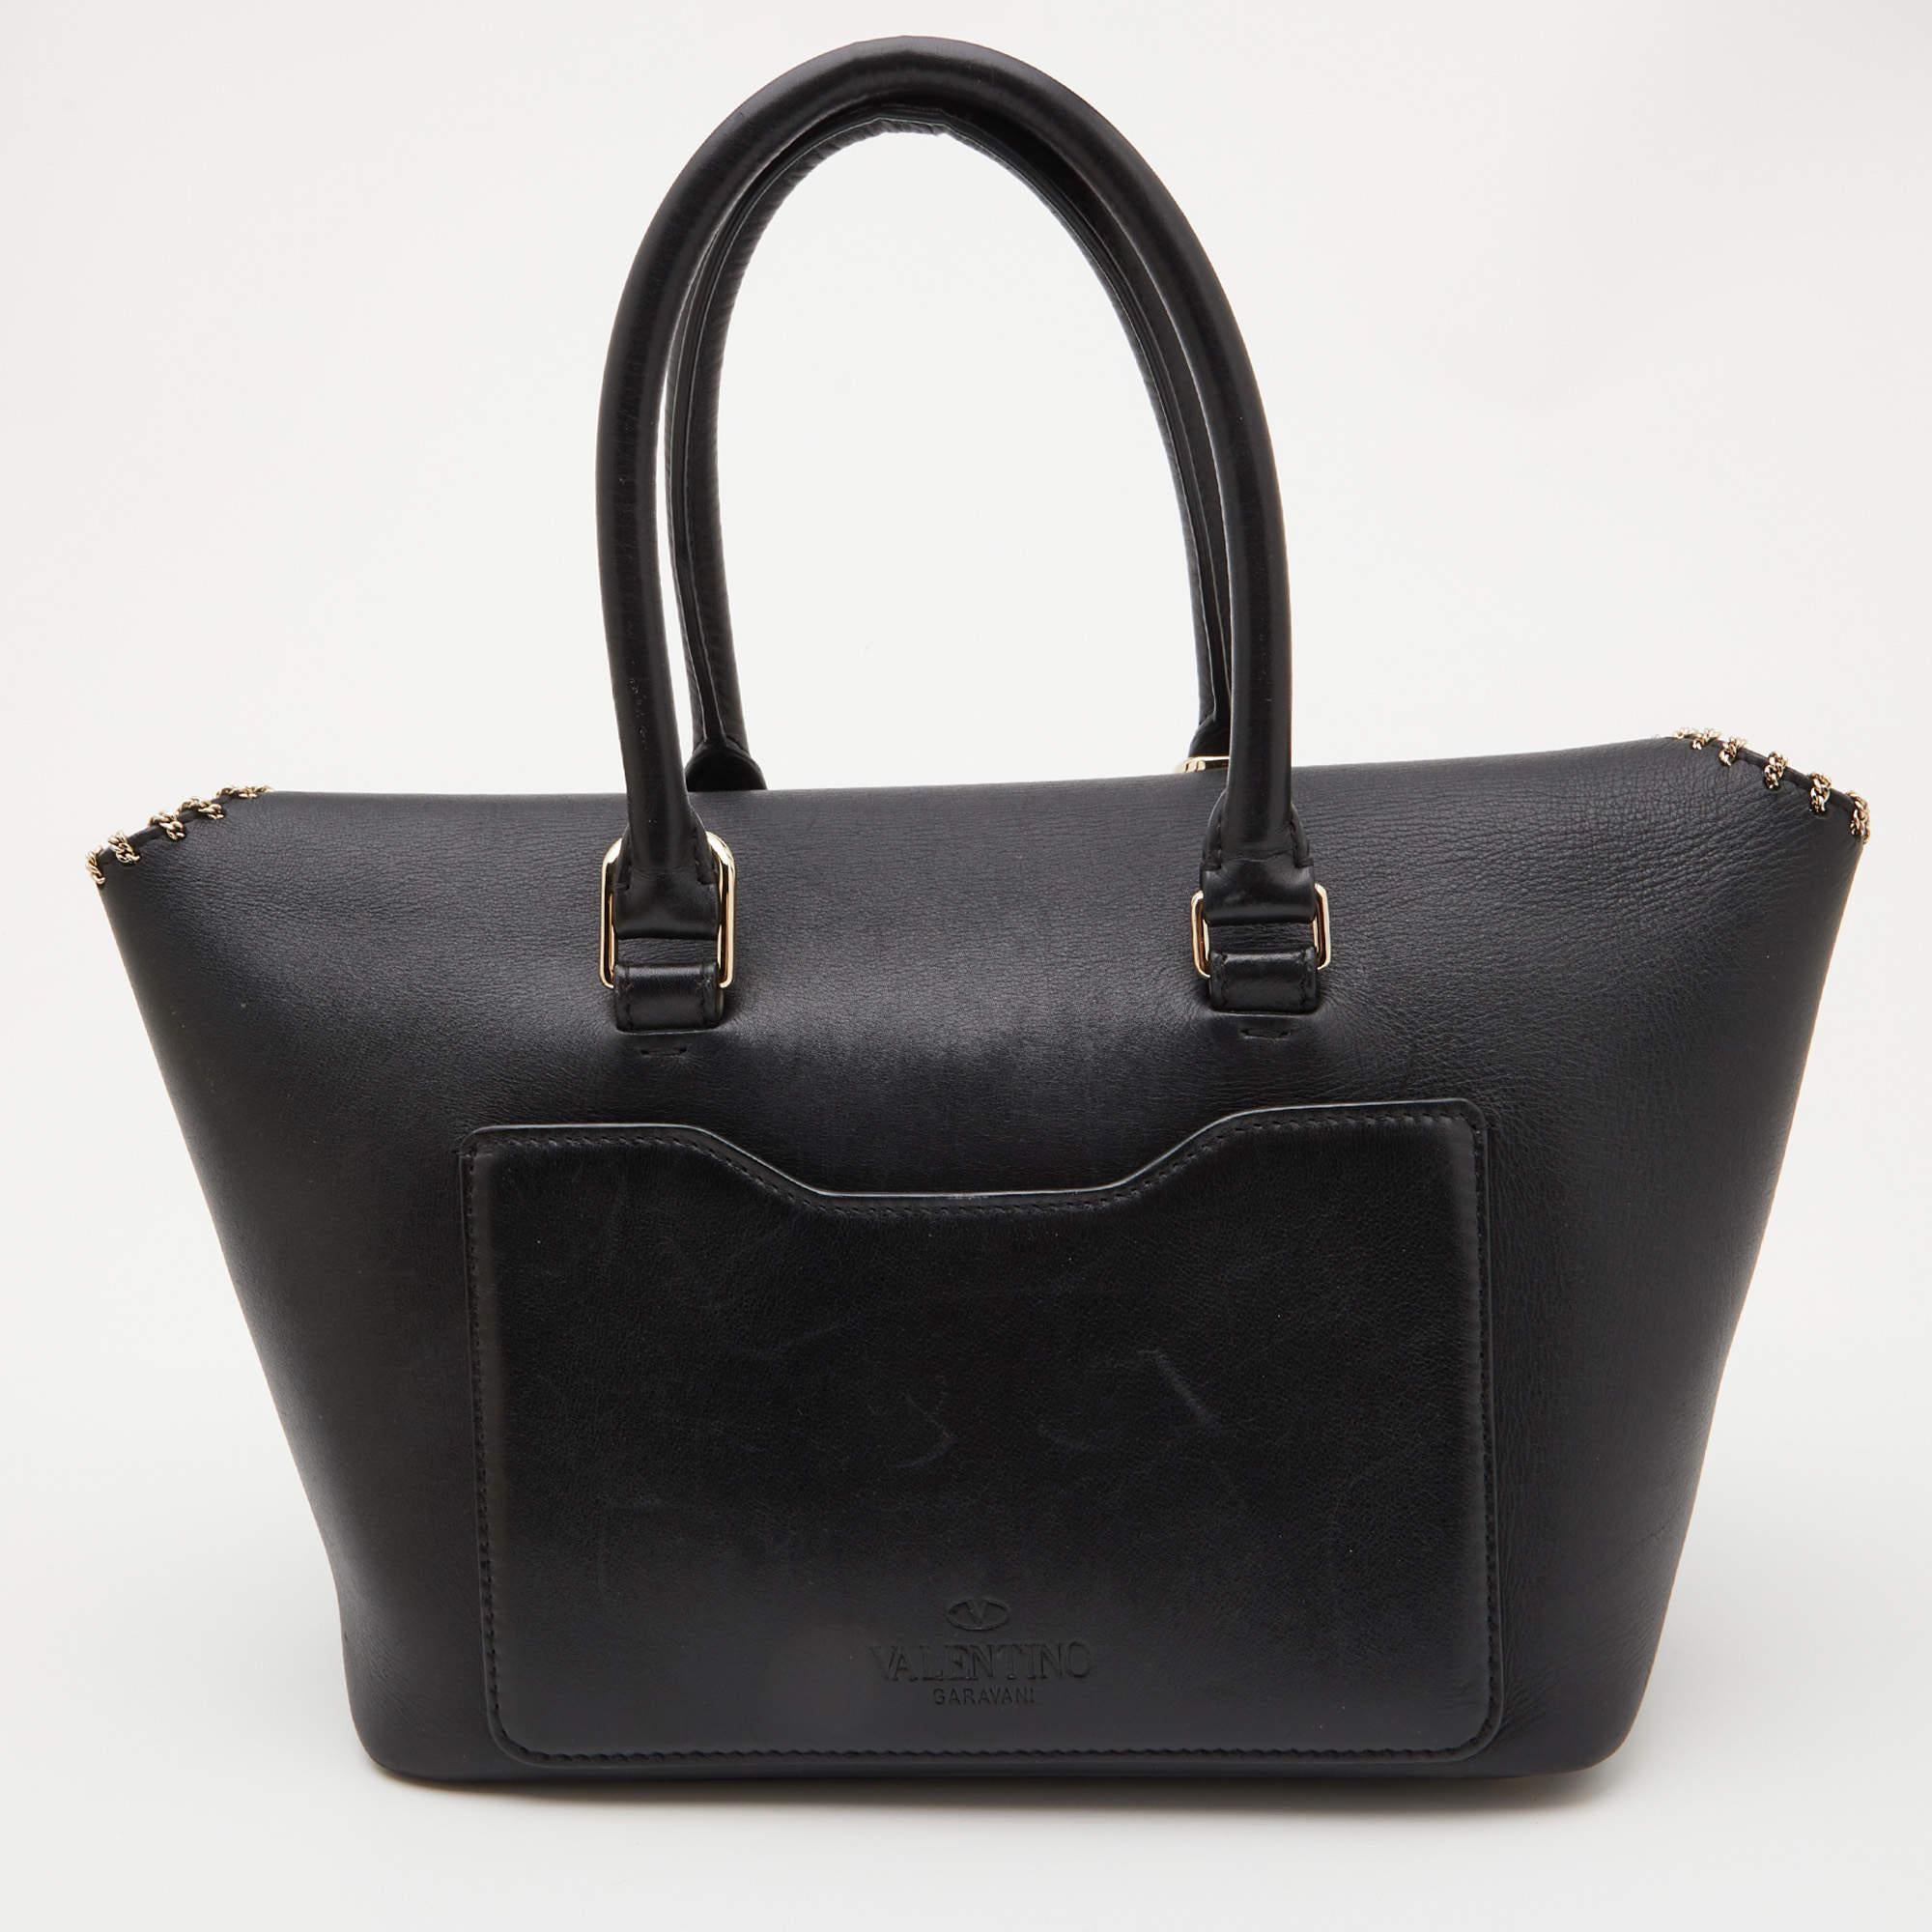 Valentino is known for its multi-functional designs, and this handbag is no different. A versatile accessory, you can use this leather bag for multiple occasions. The interior is lined with luxurious suede and is secured by a flap.

Includes: